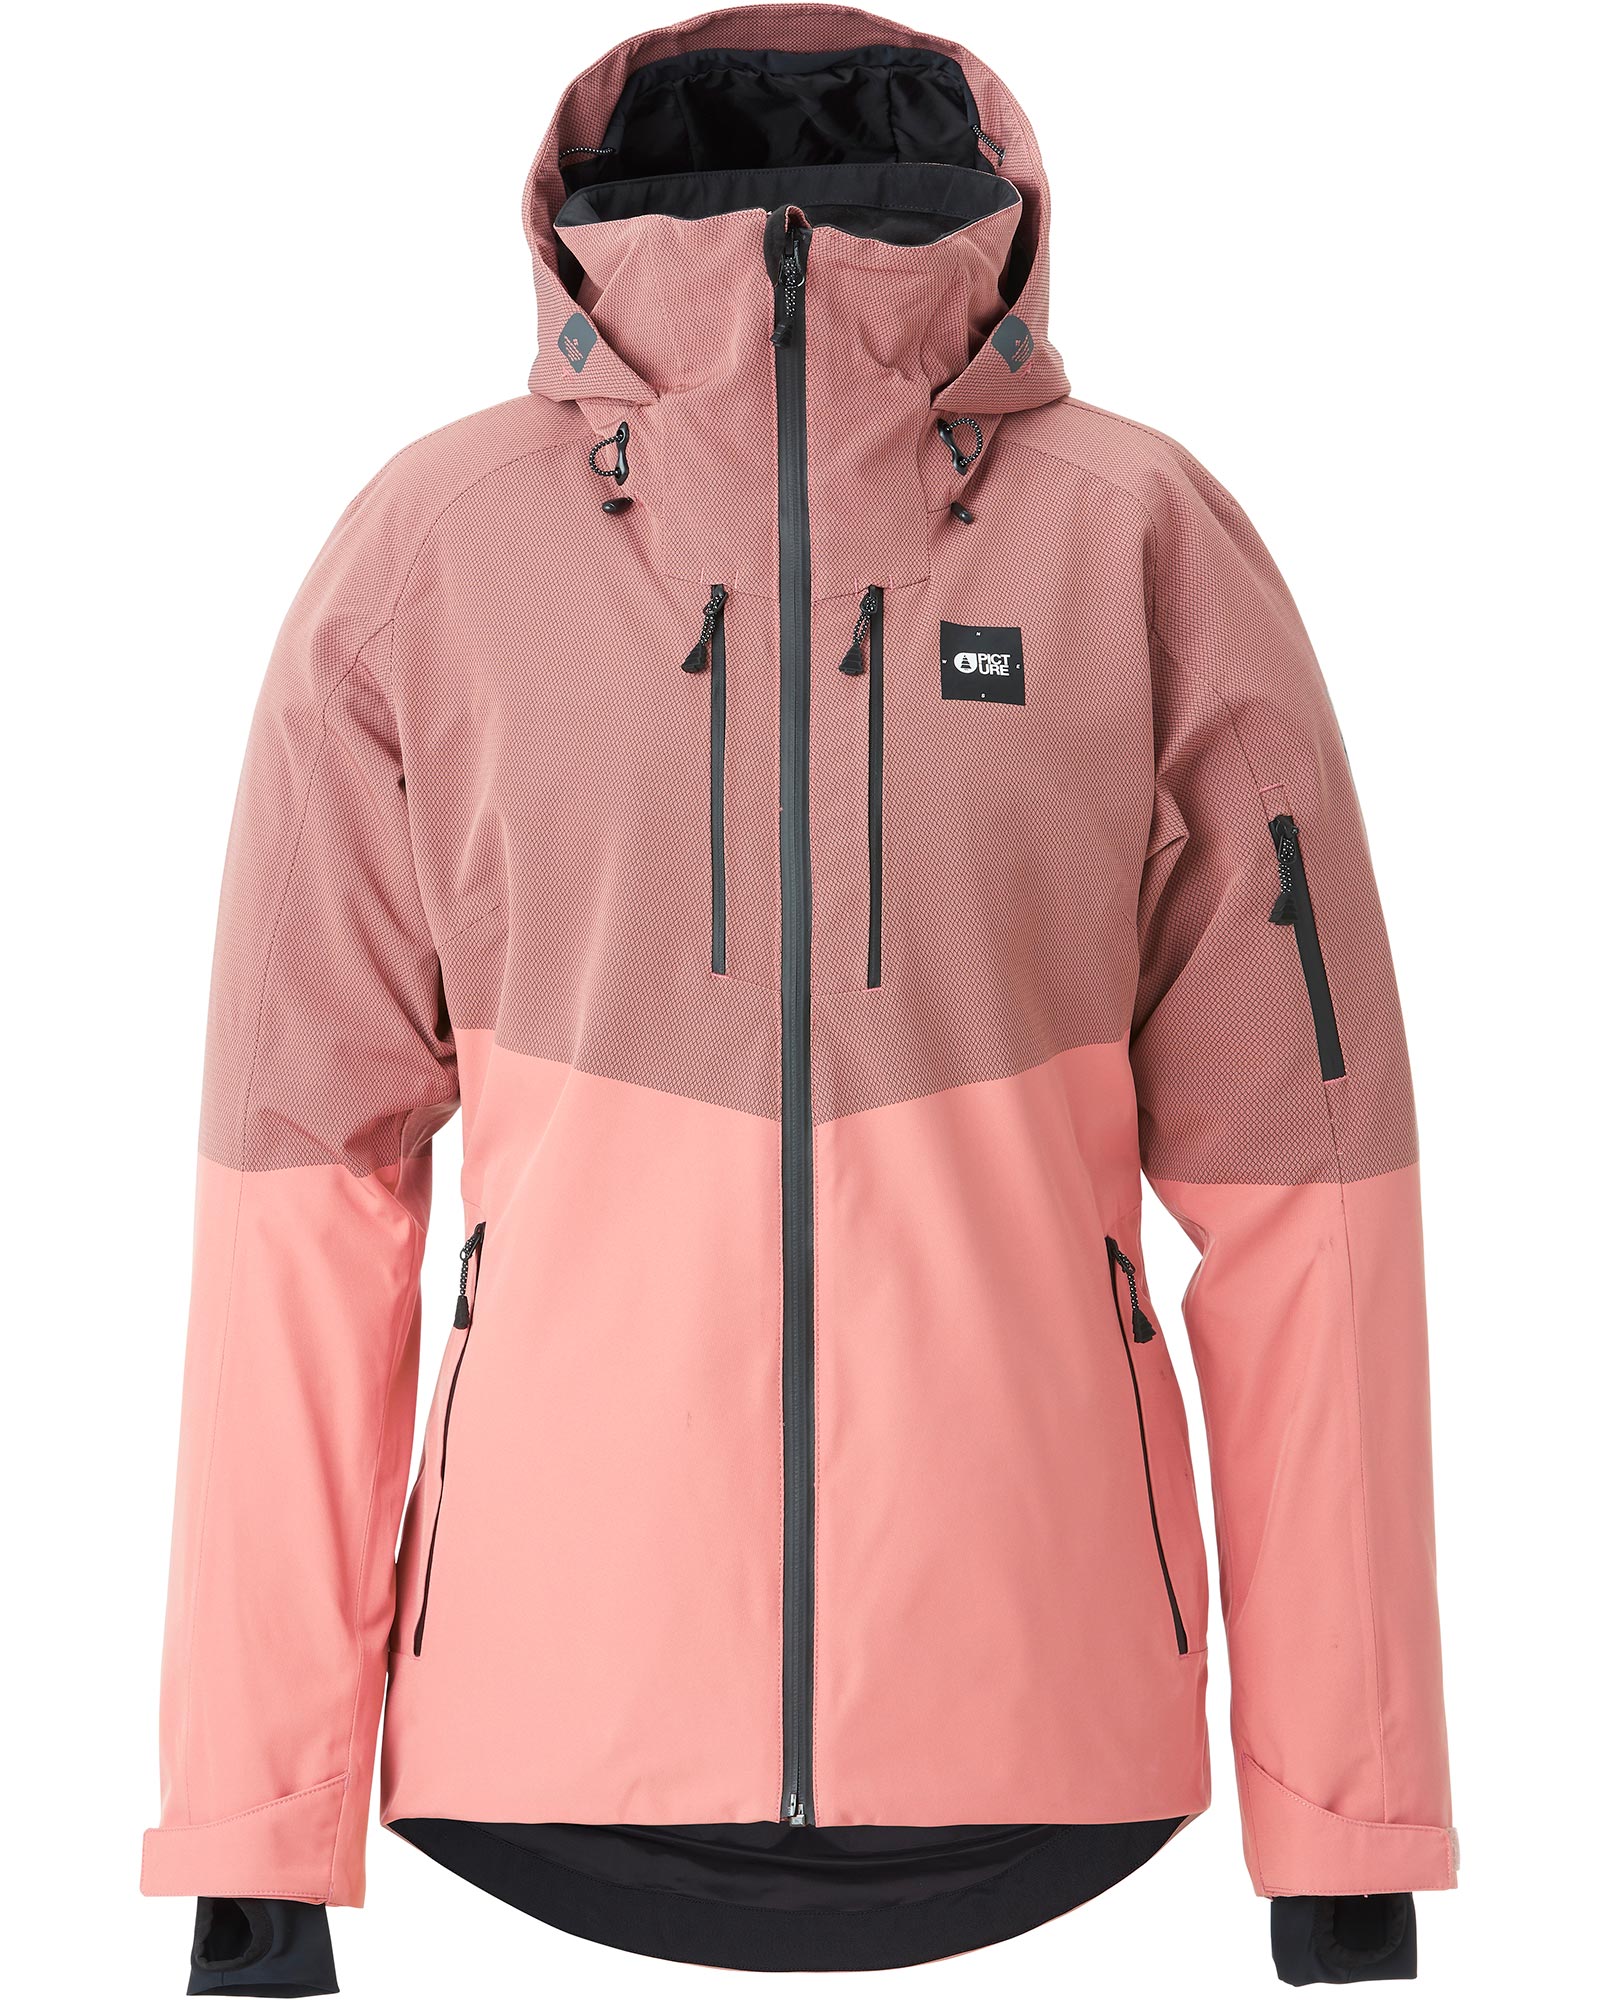 Picture Signa Womens Jacket